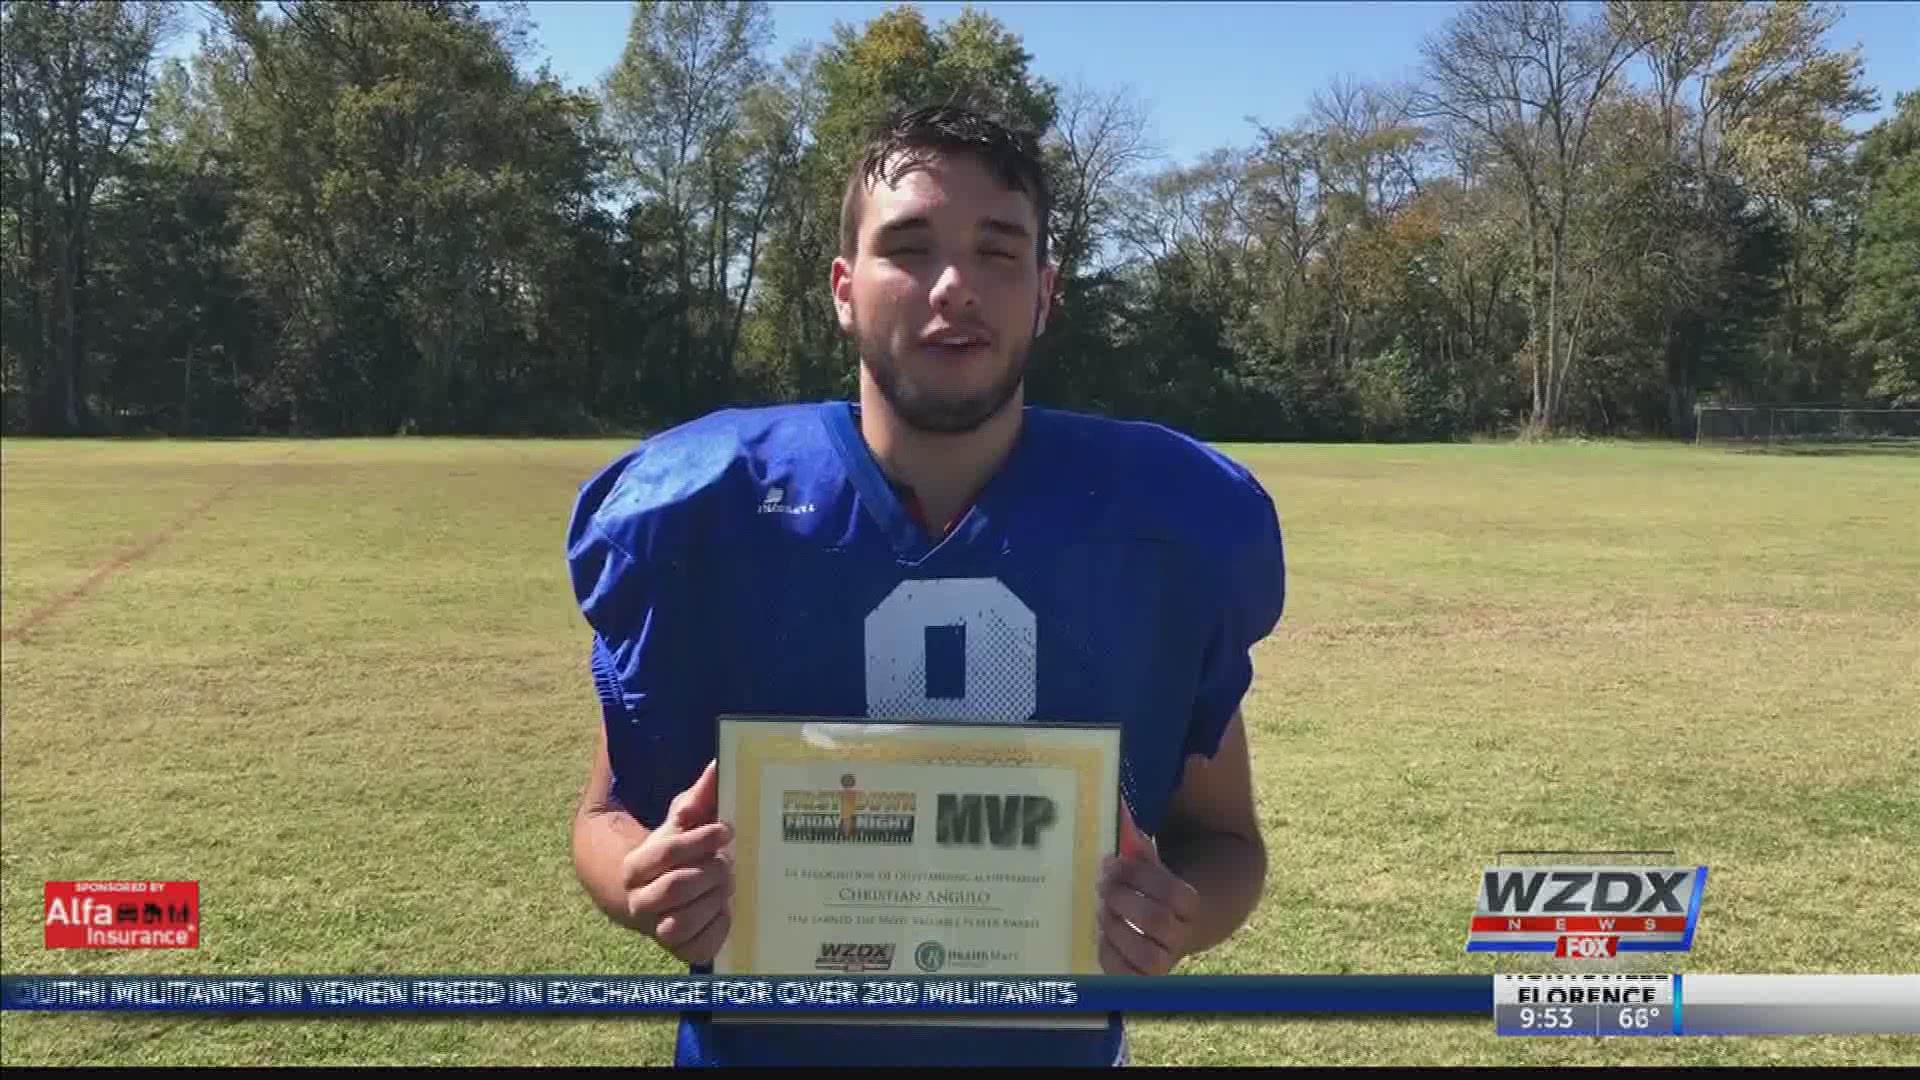 Last week, Christian Angulo scored 4 touchdowns & made 10 tackles in Falkville's shutout win over Tanner. For his efforts, Angulo is the newest FDFN MVP of the Week.